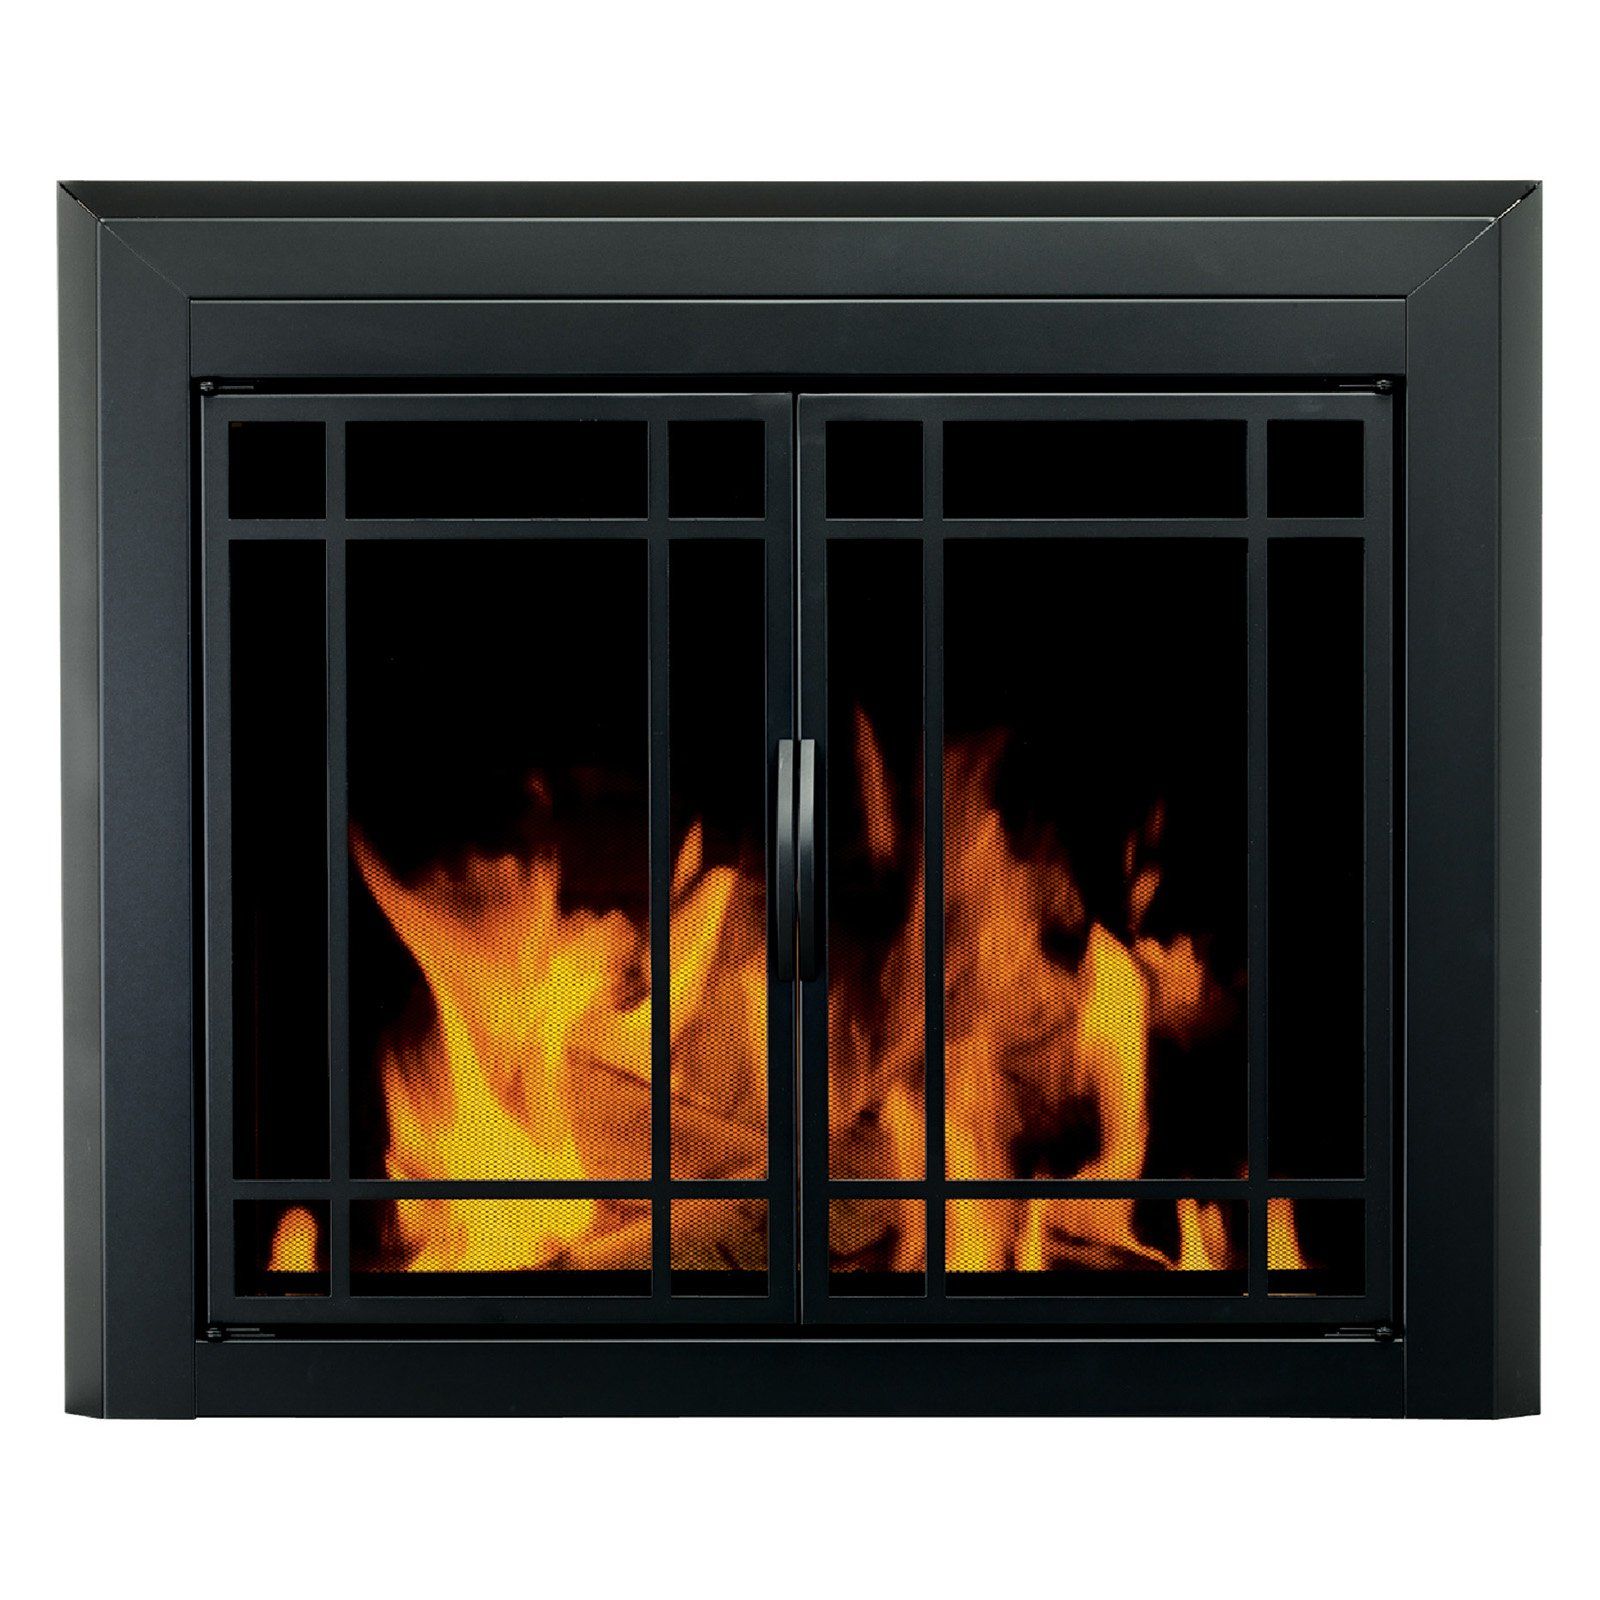 Lennox Fireplaces Awesome Pleasant Hearth Easton Prairie Cabinet Fireplace Screen and